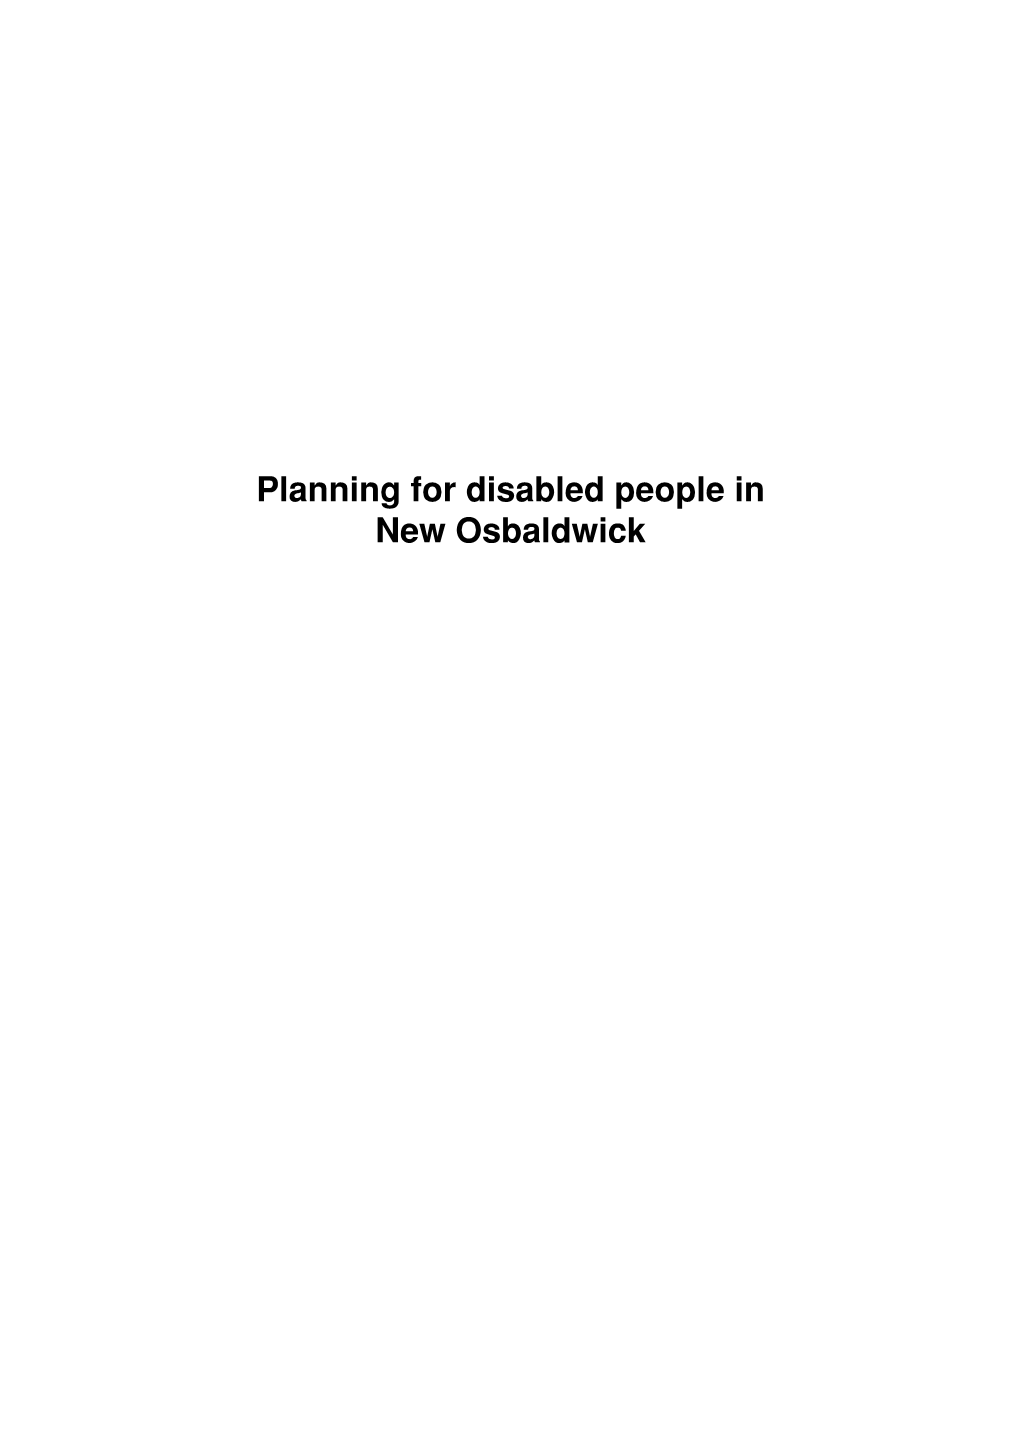 Planning for Disabled People in New Osbaldwick